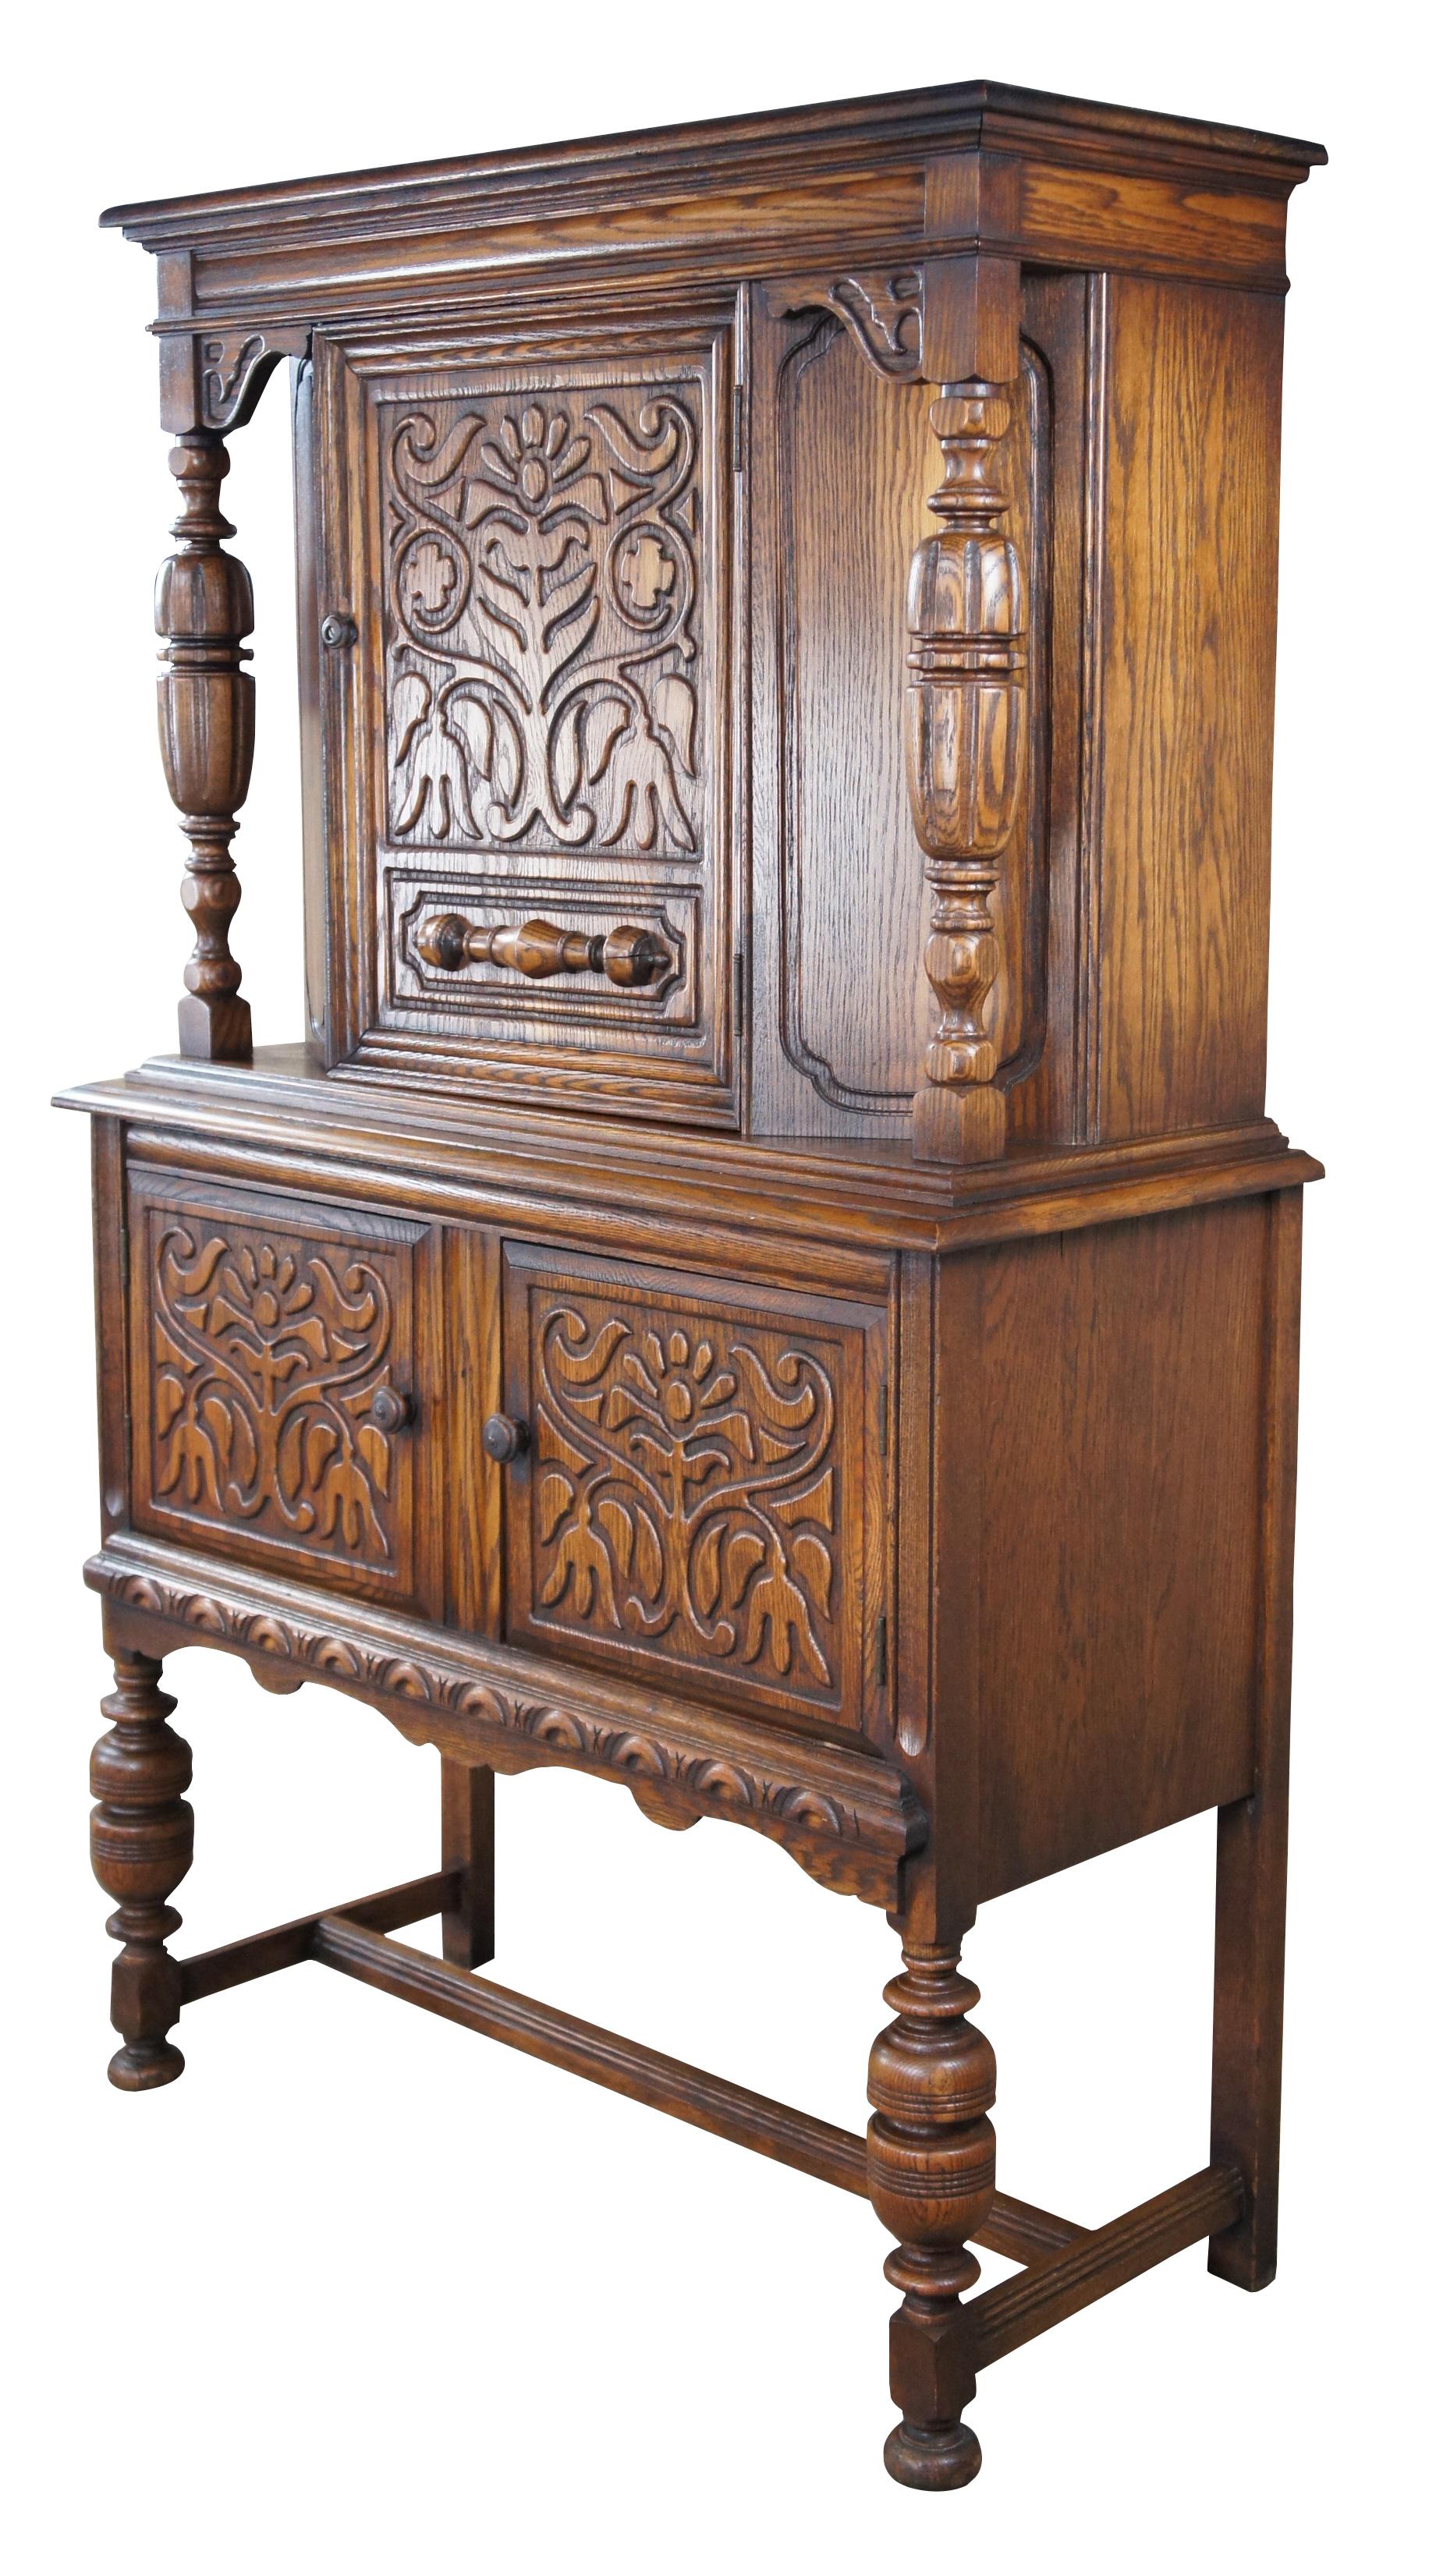 Early 20th Century Jacobean / Elizabethan revival court cupboard. Made from oak with an upper hutch mounted between two beautifully turned baluster supports. Features low relief foliate carved doors and a large lower storage area. The rectangular